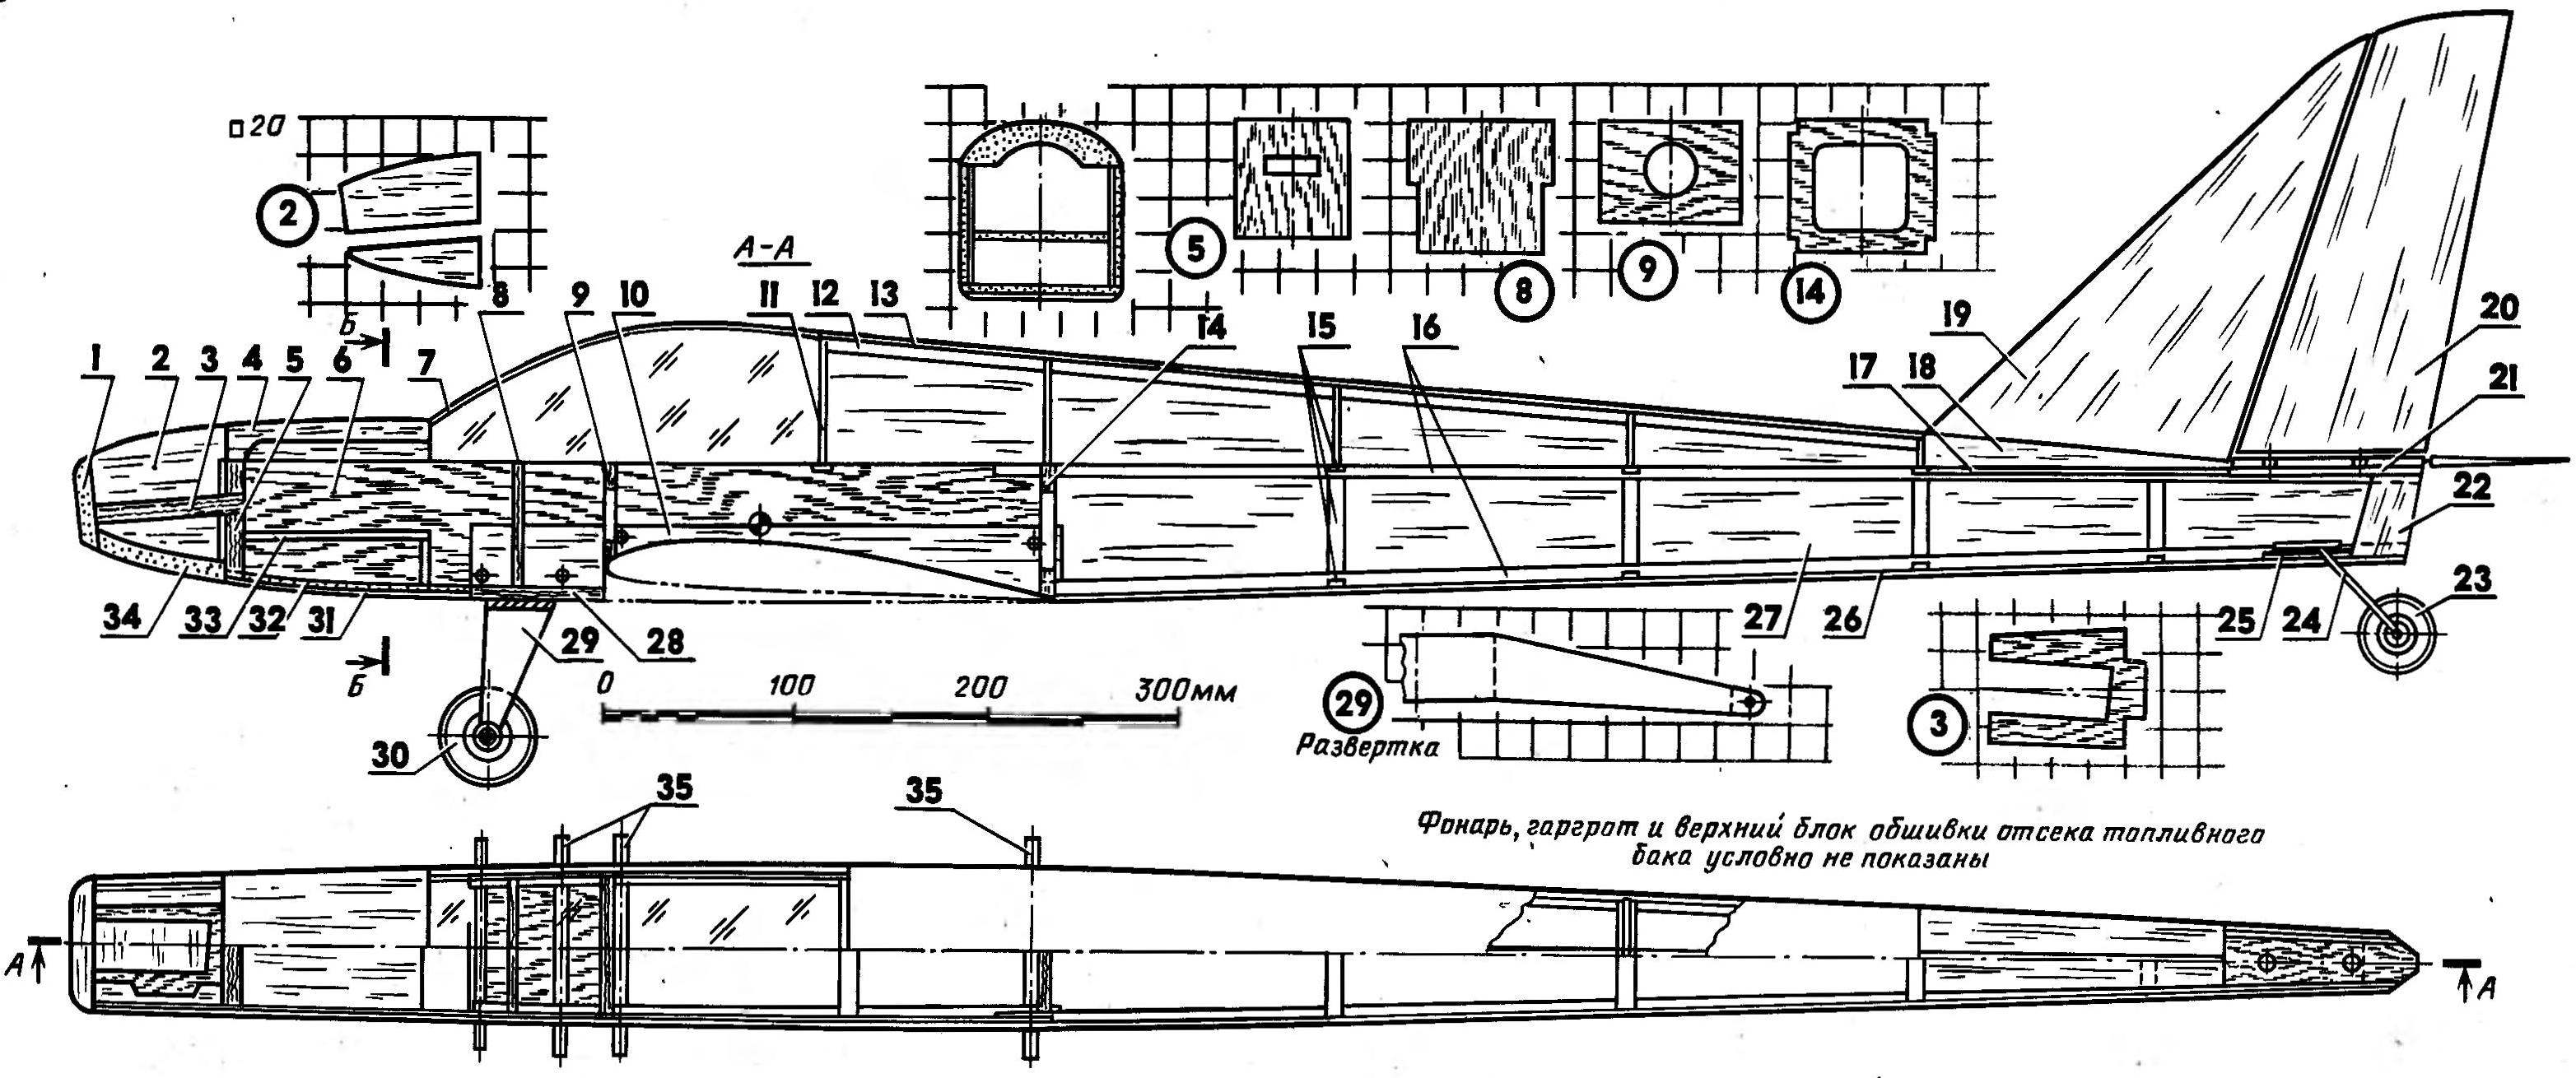 Fig. 2. The fuselage